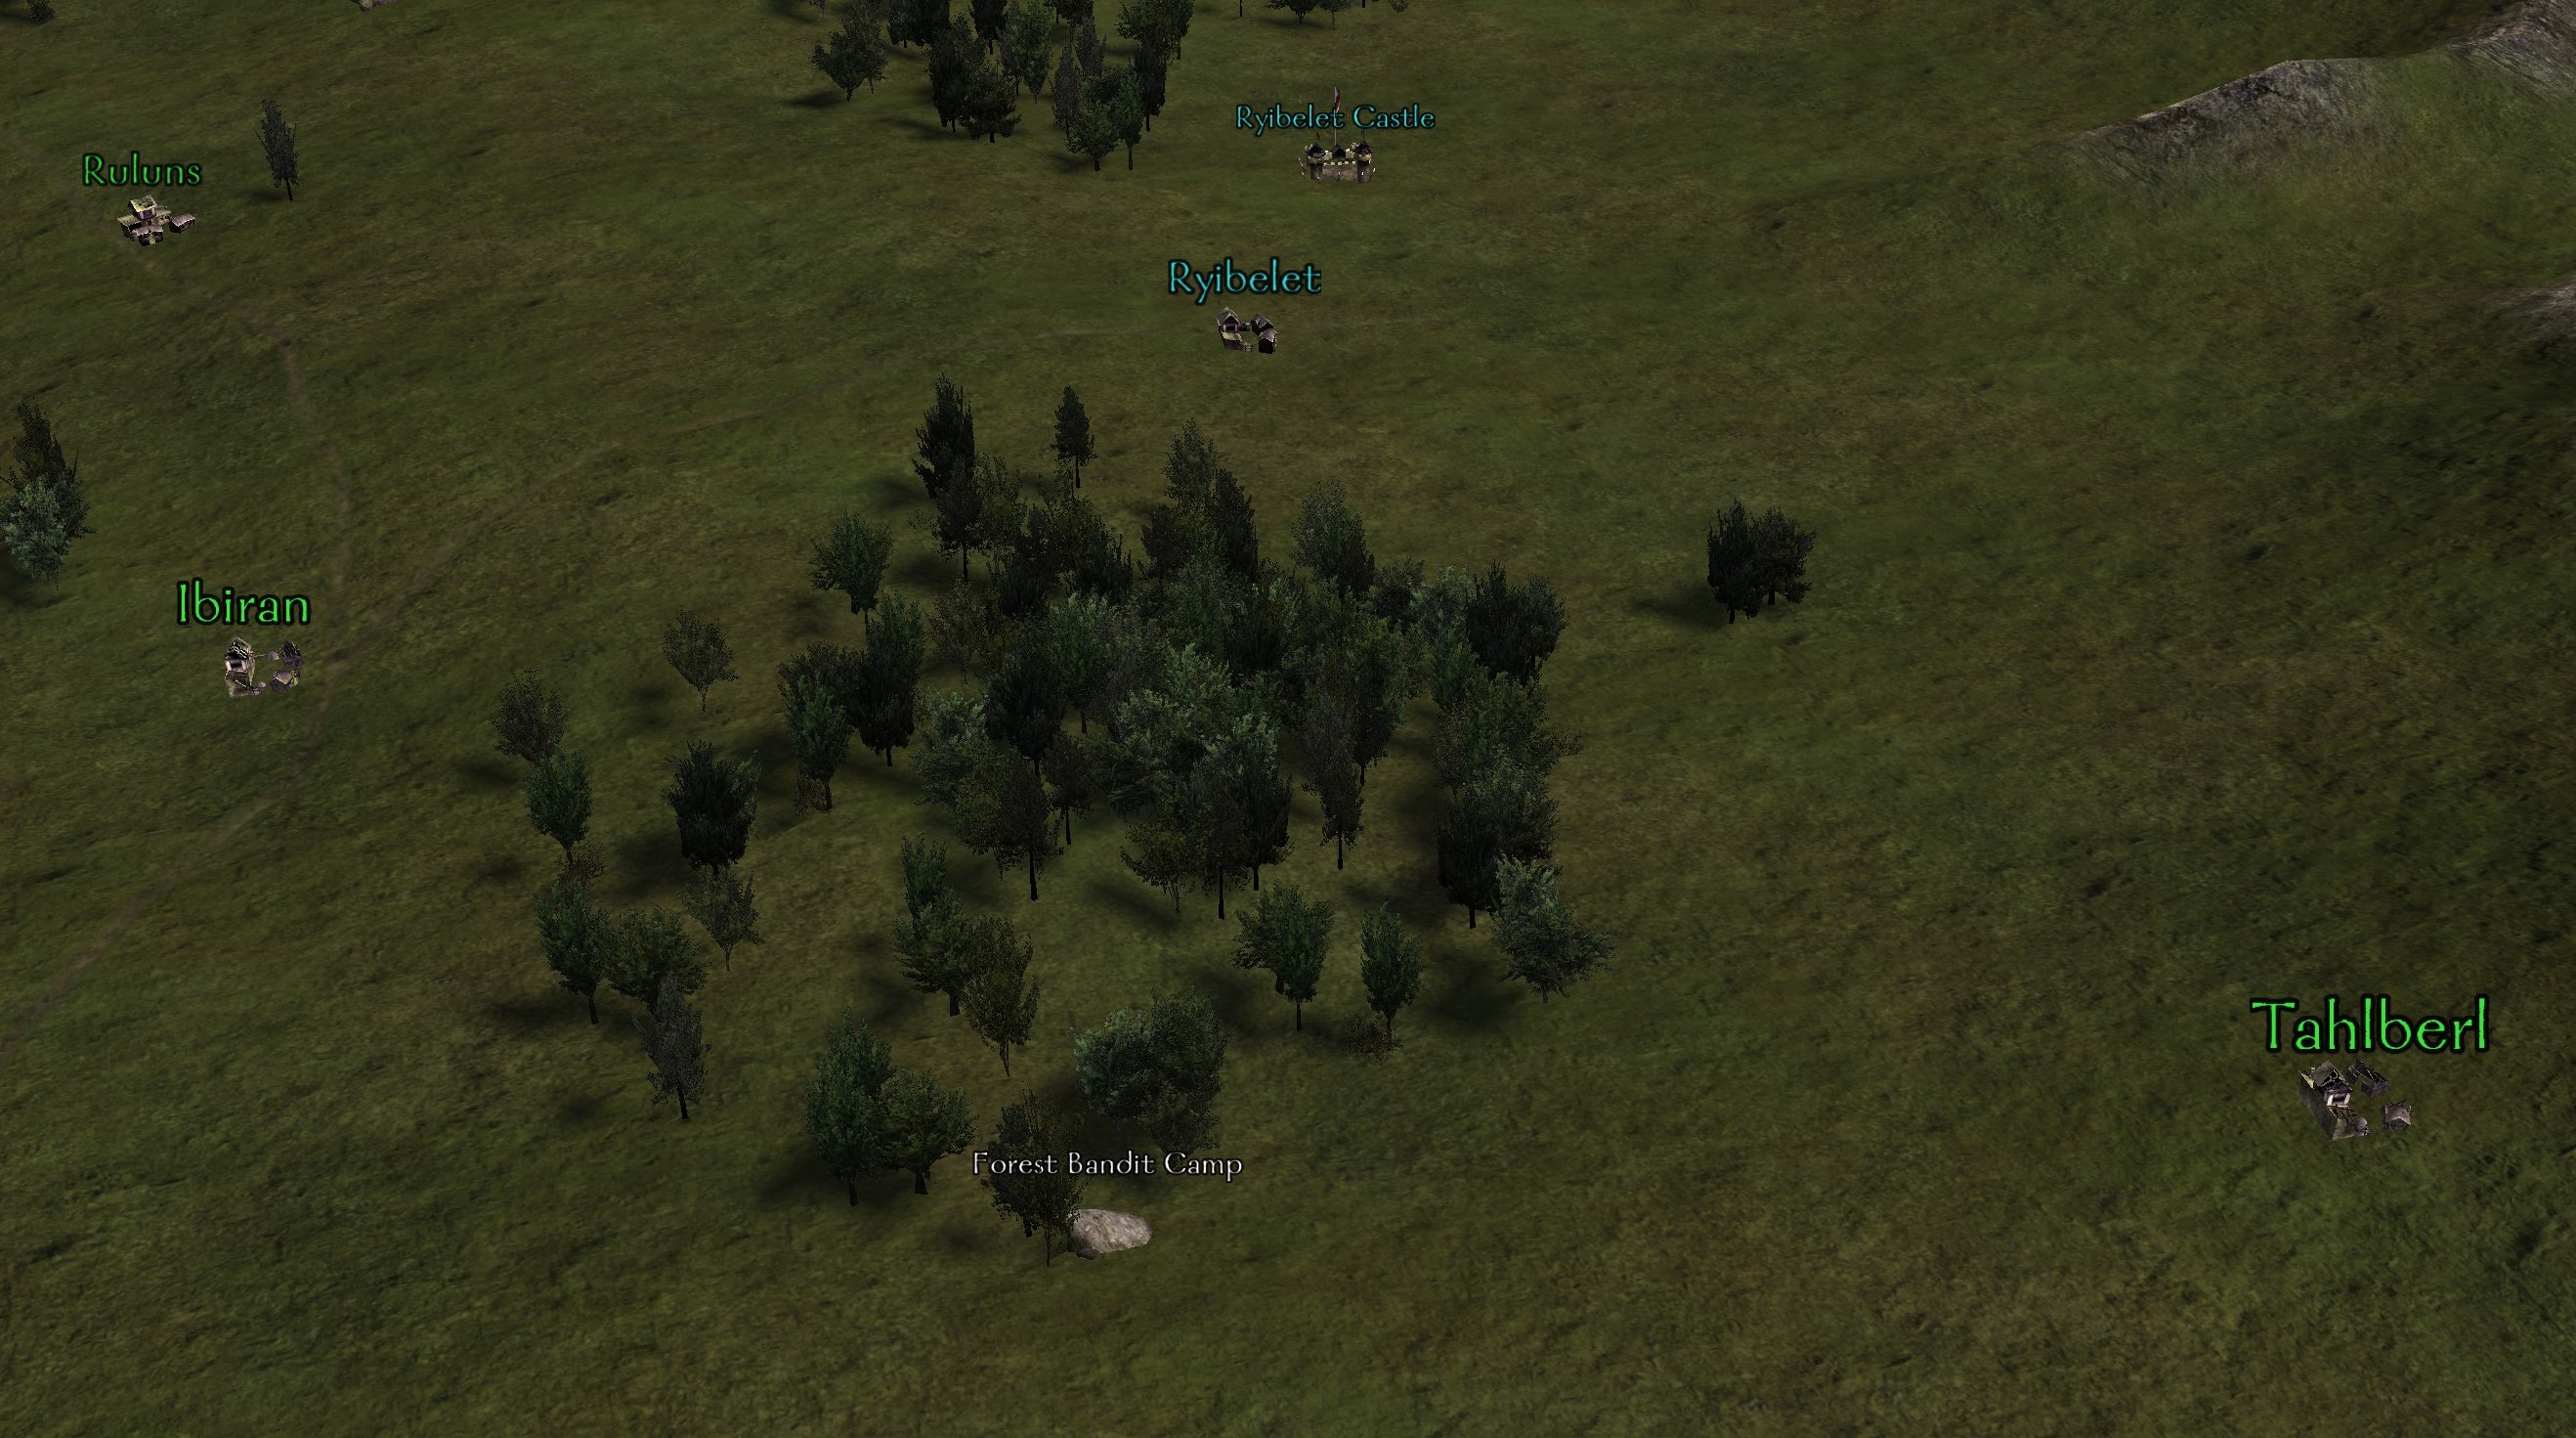 Mount & Blade: Warband - Forest Bandit Camp Locations.